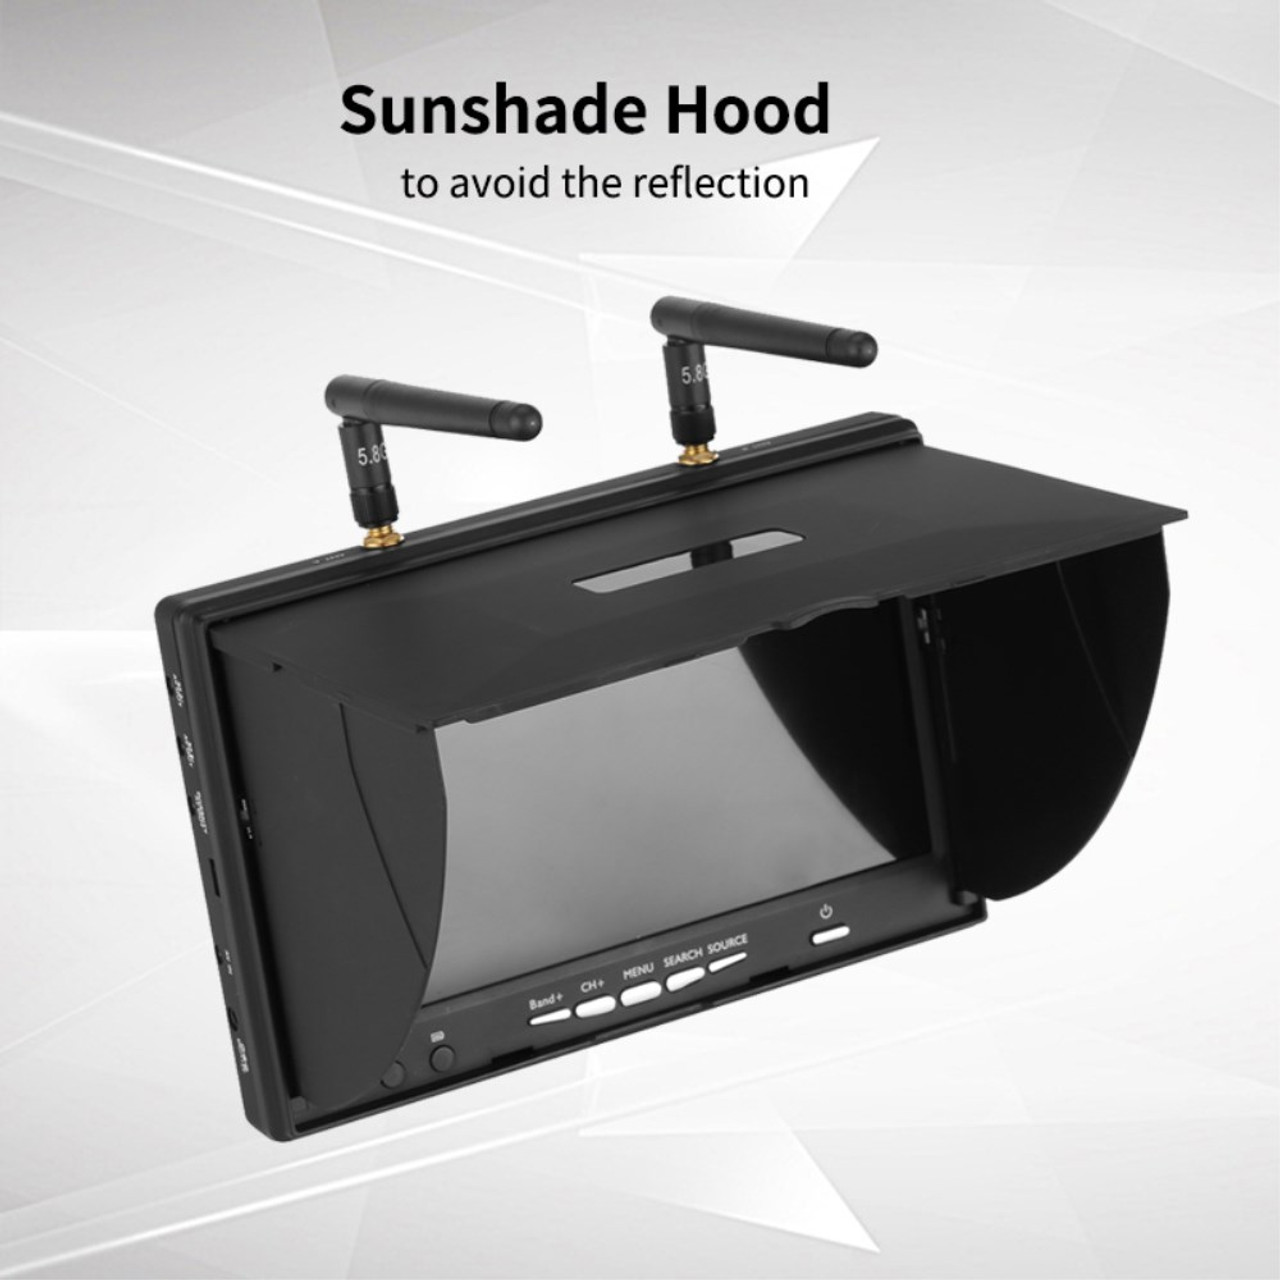 LS-5802D FPV Monitor 5.8Ghz 40 Channels 7-Inch Screen Receiver Monitor with  Sunshade Hood and Dual Antenna for FPV RC Drone Quadcopter EU Plug  Snatcher